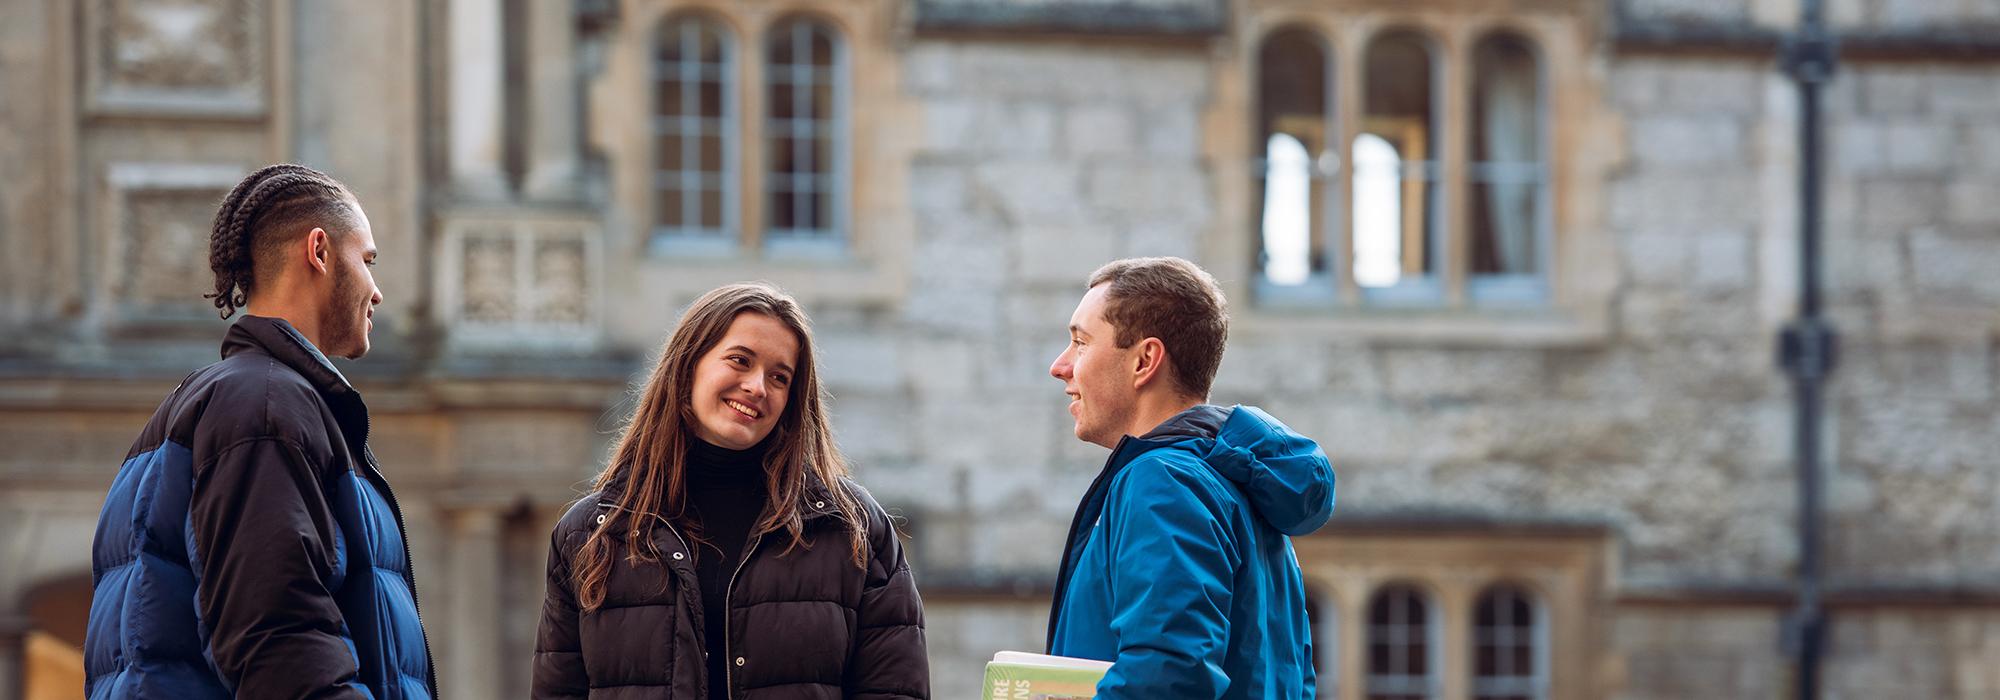 Students in Front Quad, 2019 - Photo: © John Cairns - www.johncairns.co.uk